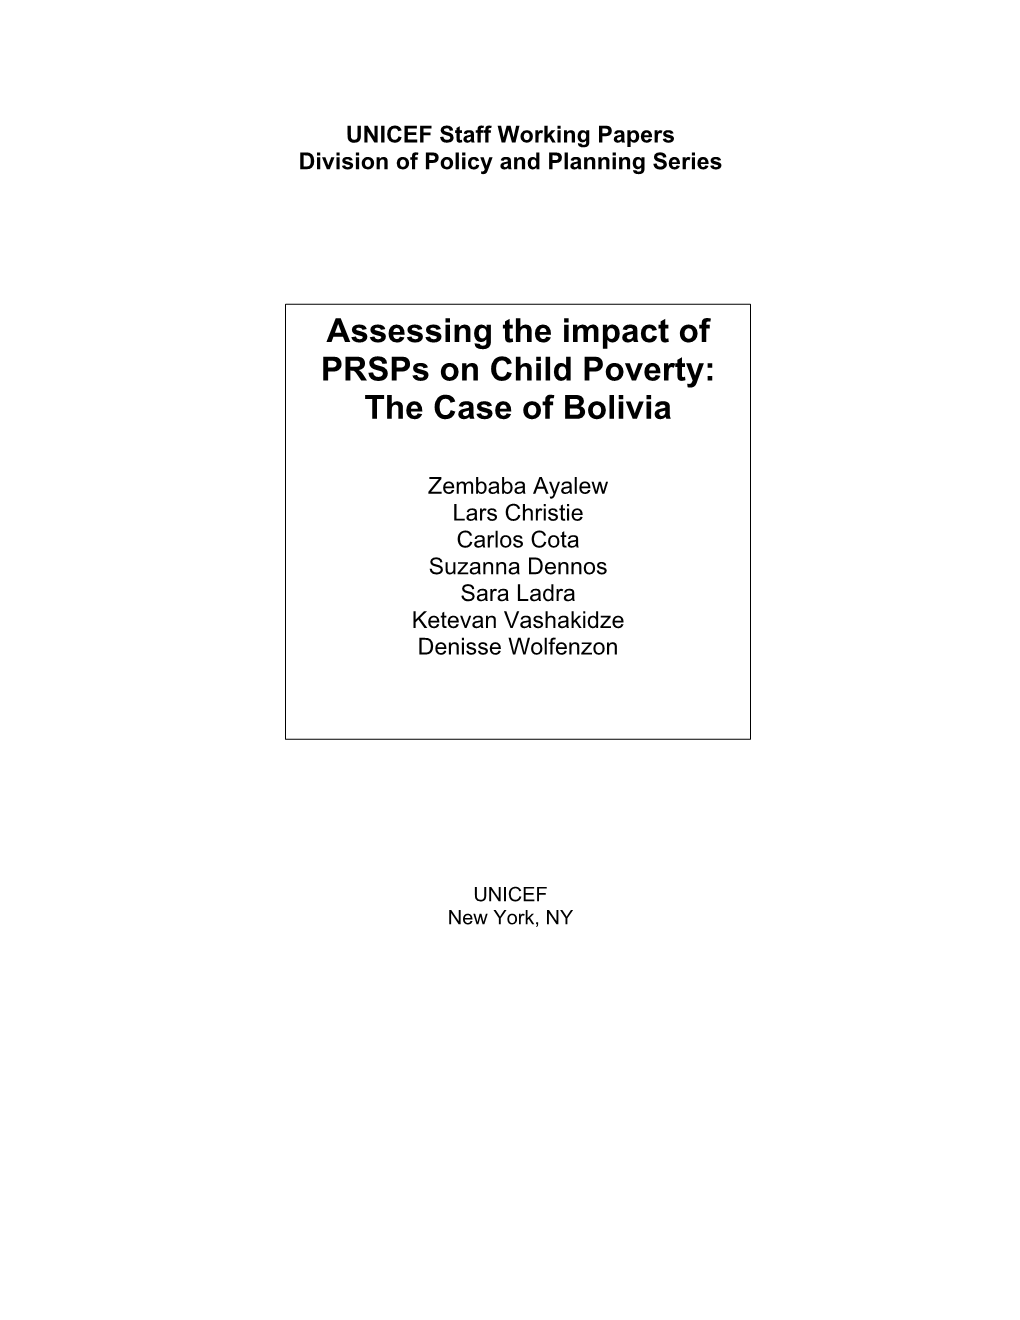 Assessing the Impact of Prsps on Child Poverty: the Case of Bolivia